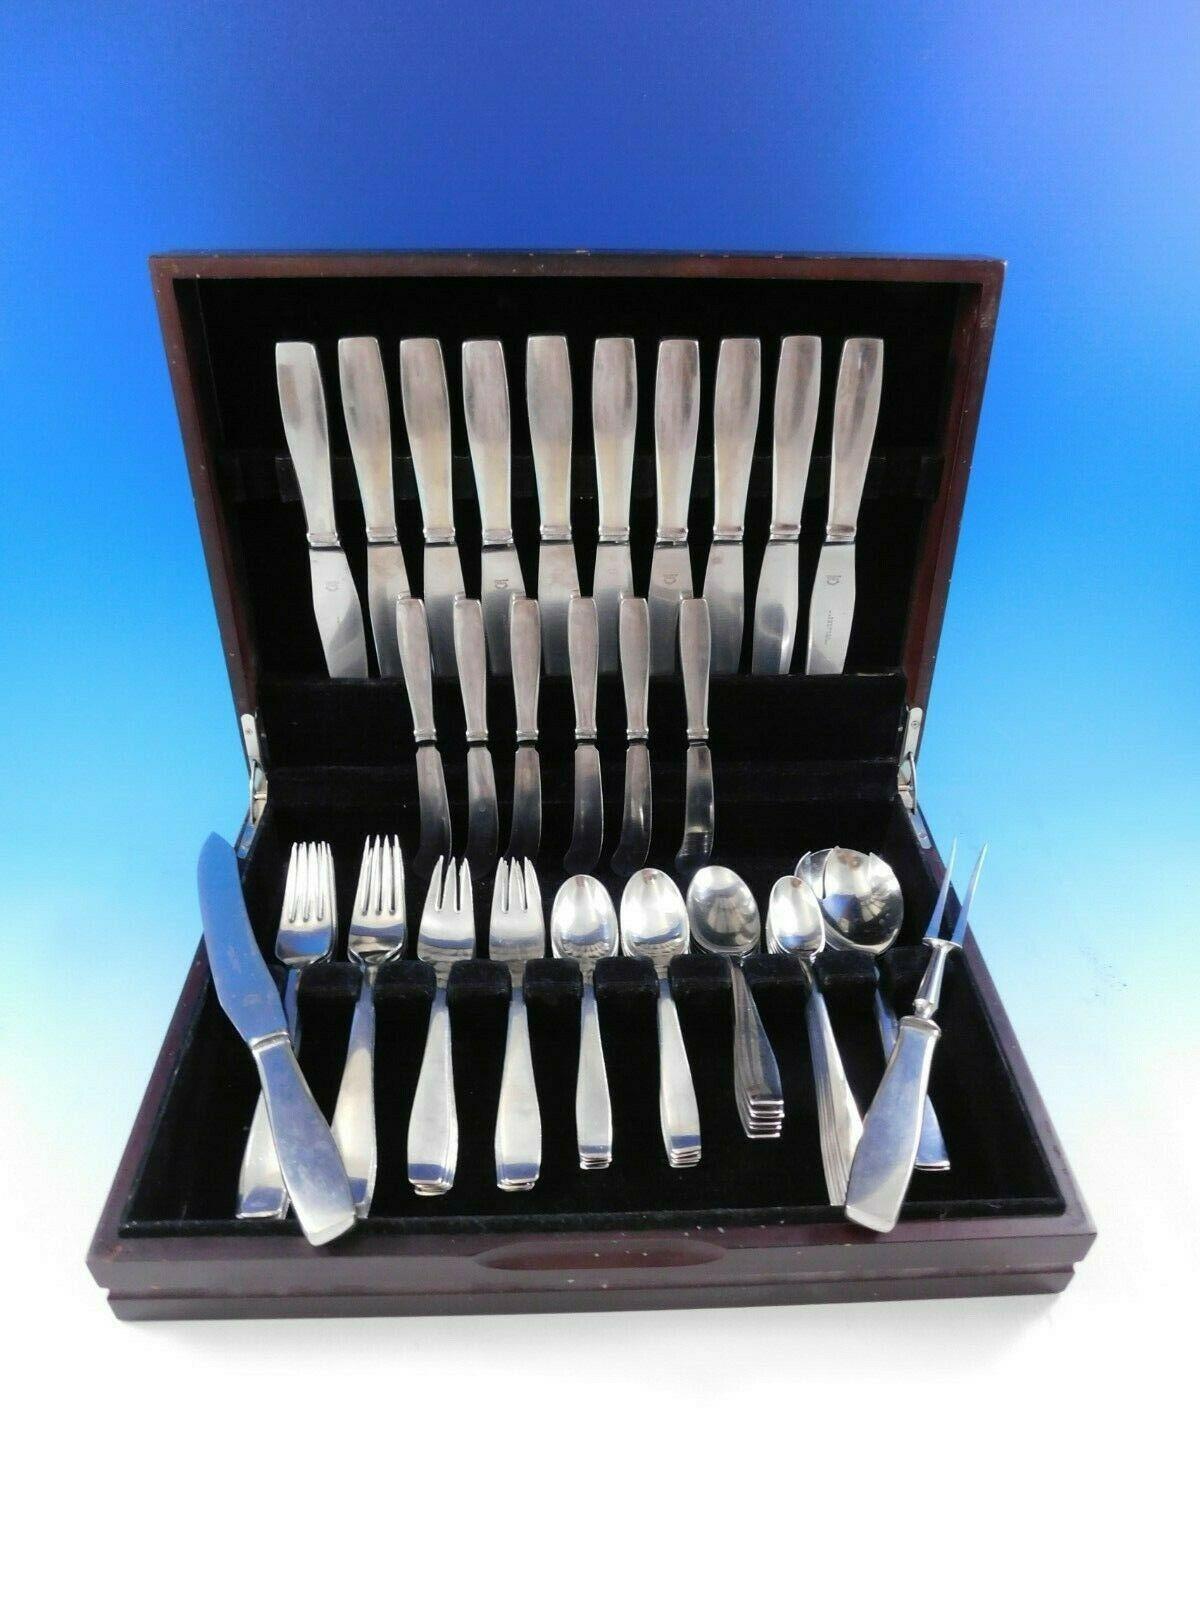 Georg Jensen stainless steel 

Estate Mid-Century Modern style Plata by Georg Jensen stainless flatware set - 62 pieces. This set includes:

10 dinner knives, 9 1/4